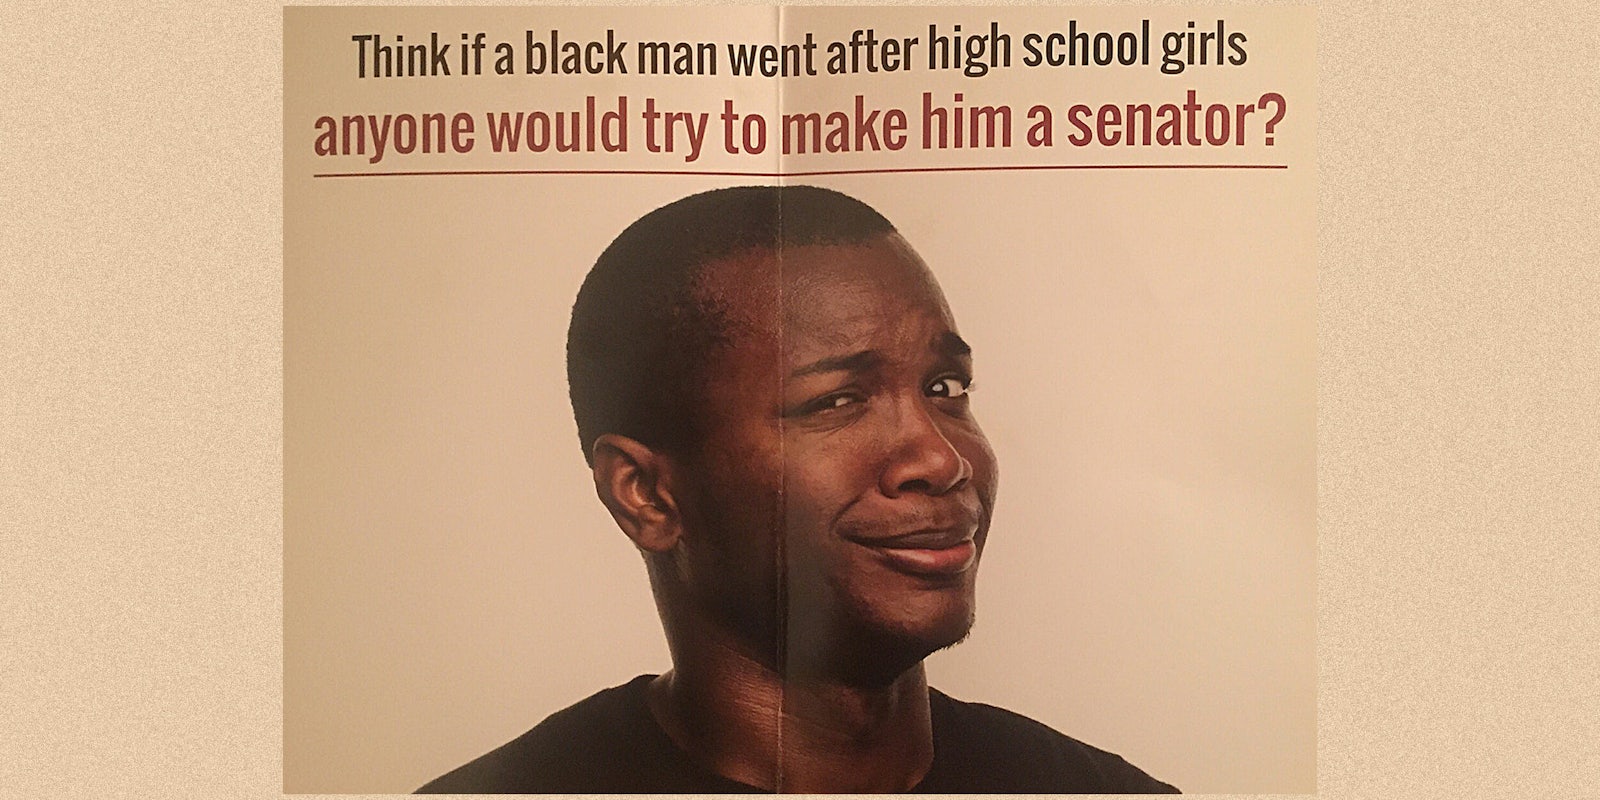 'Think if a black man went after high school girls anyone would try to make him a senator?' flyer